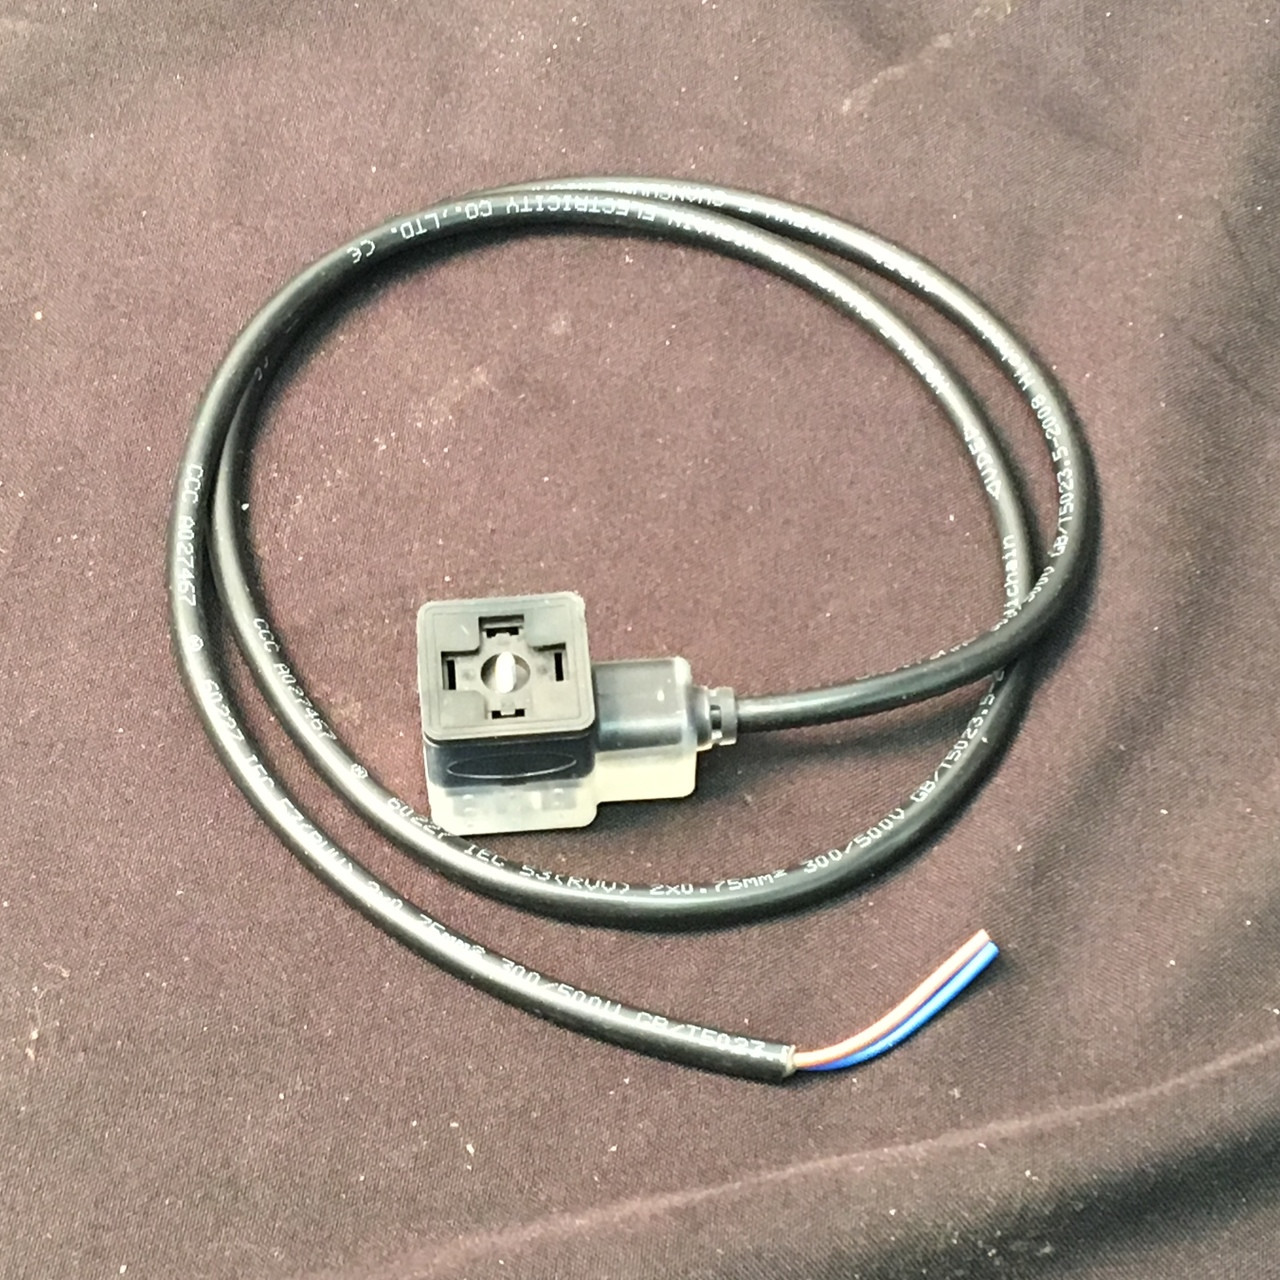 900-3931-76: BANDIT 1 METER ELEC. CABLE WITH HERSHMAN CONNECTOR